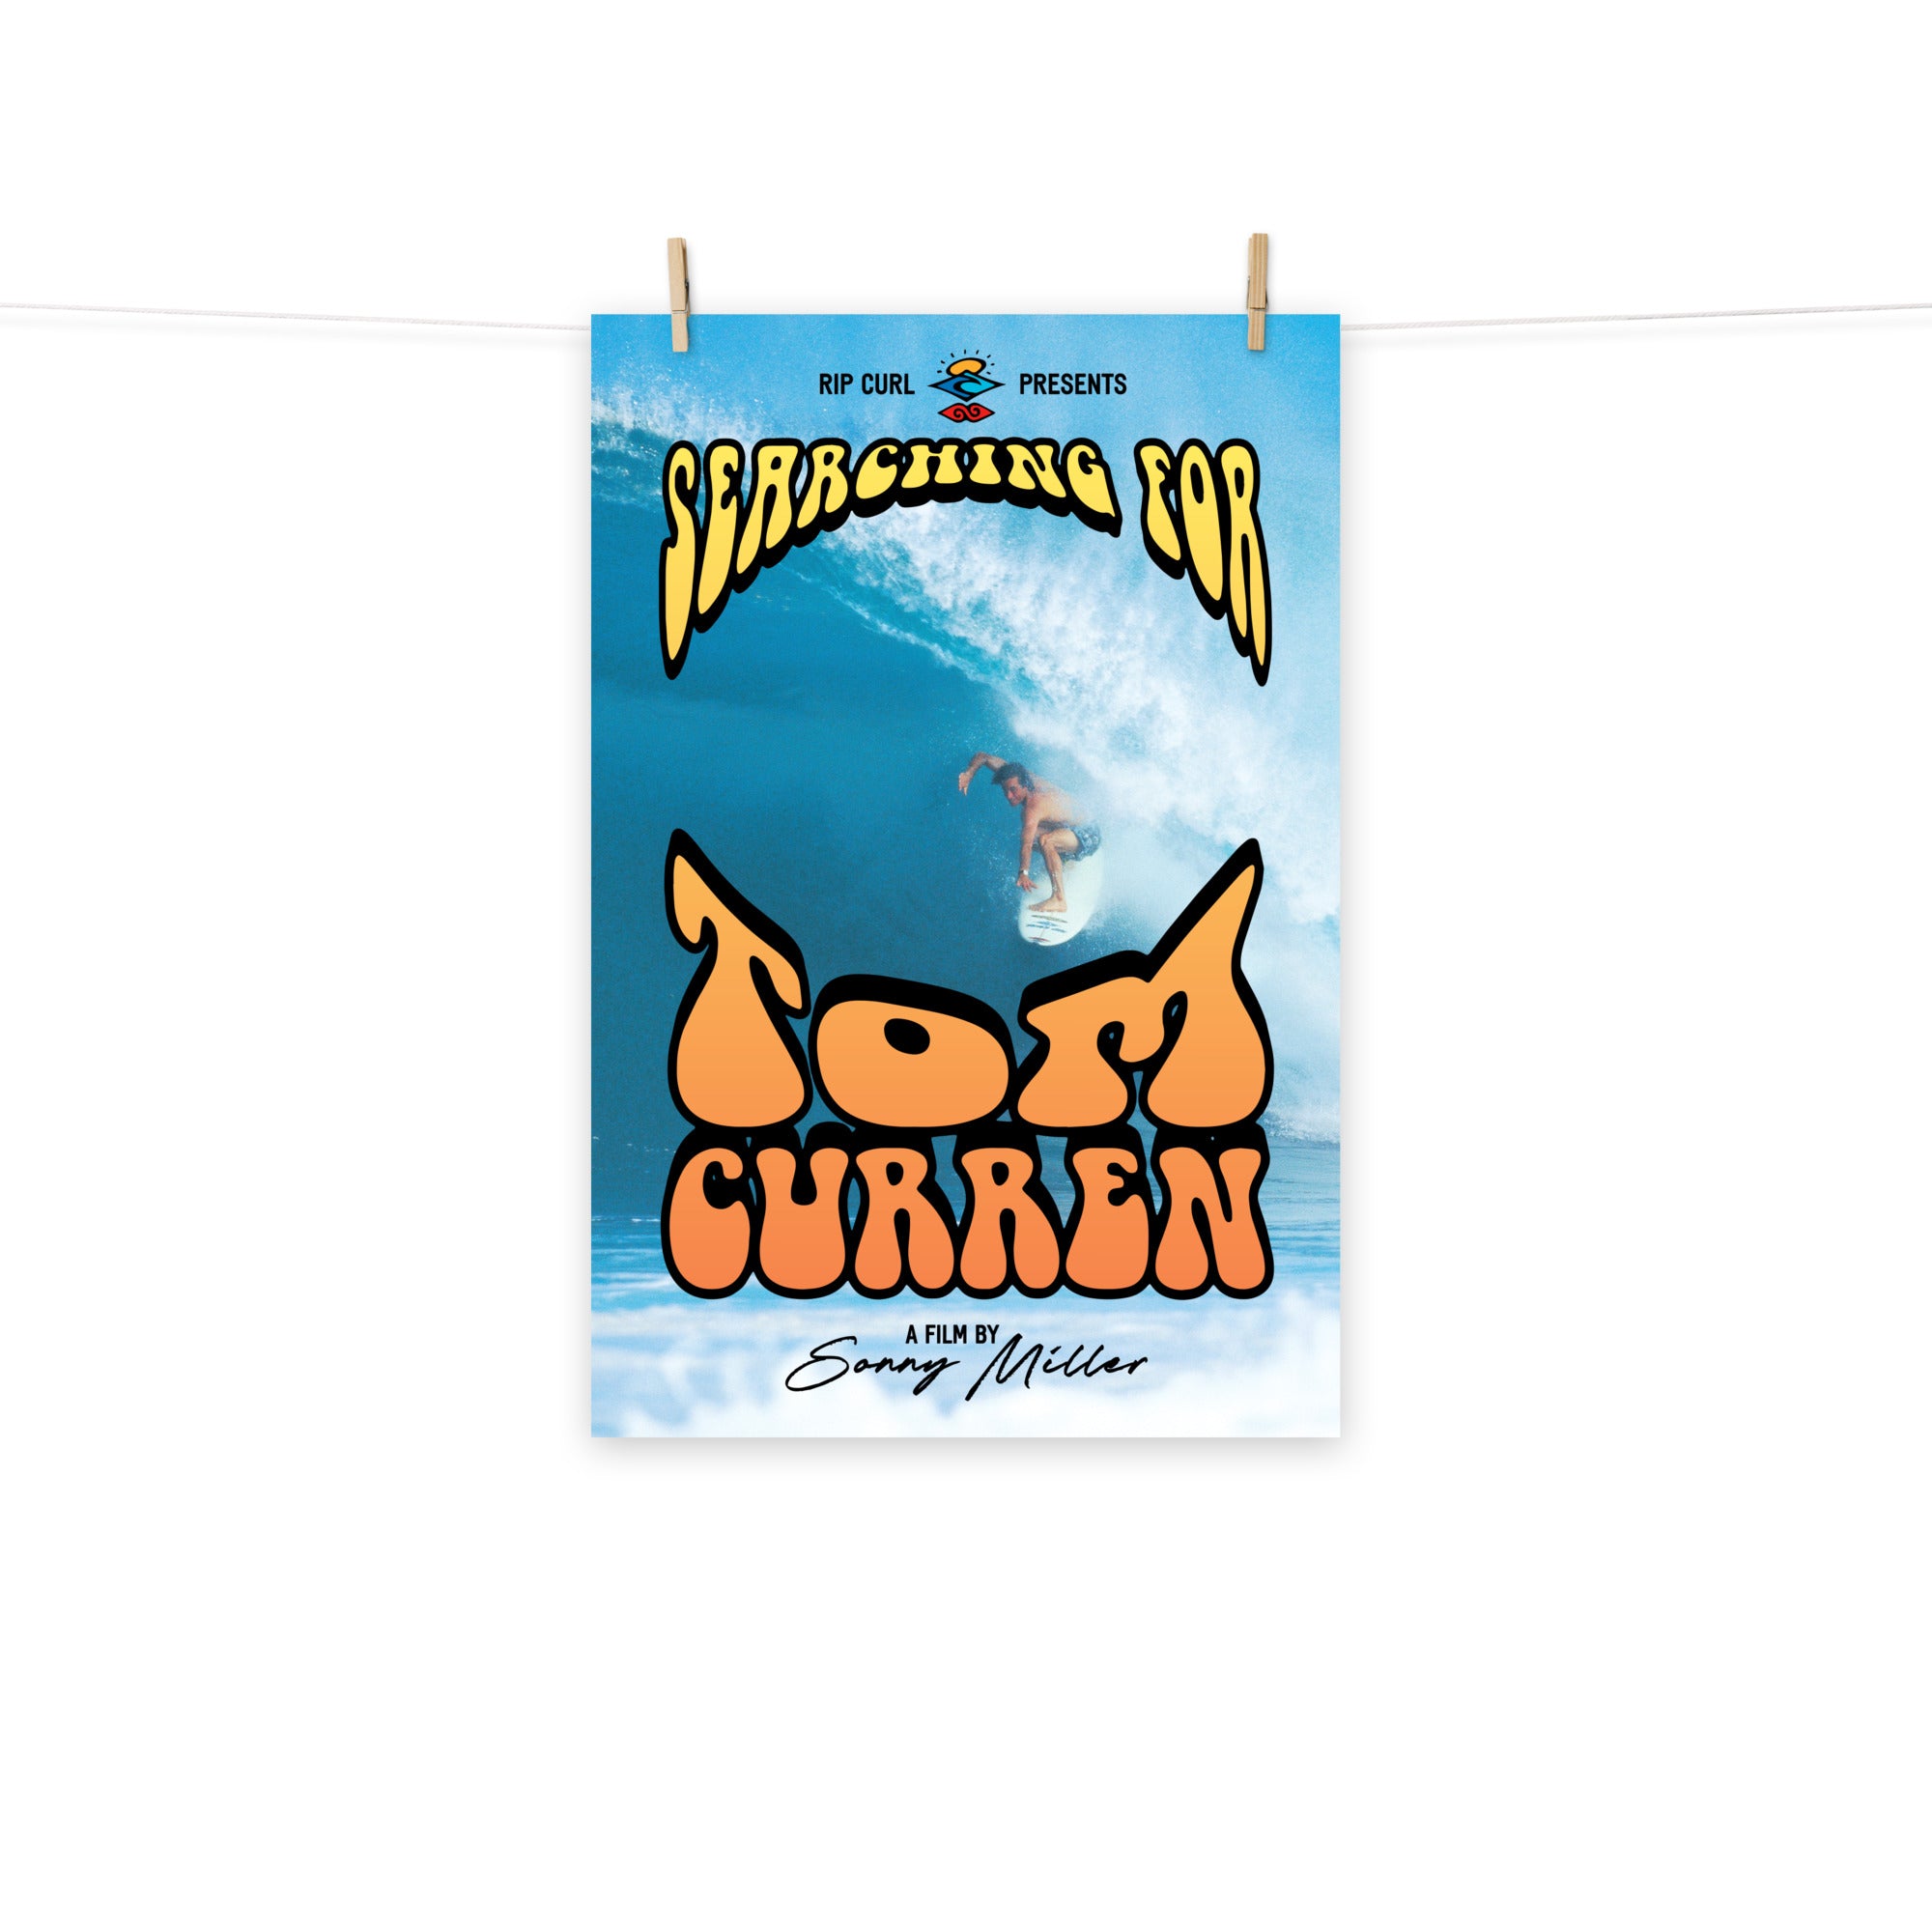 Searching for Tom Curren Poster | Thick Matte Paper 20x30 or 24x36